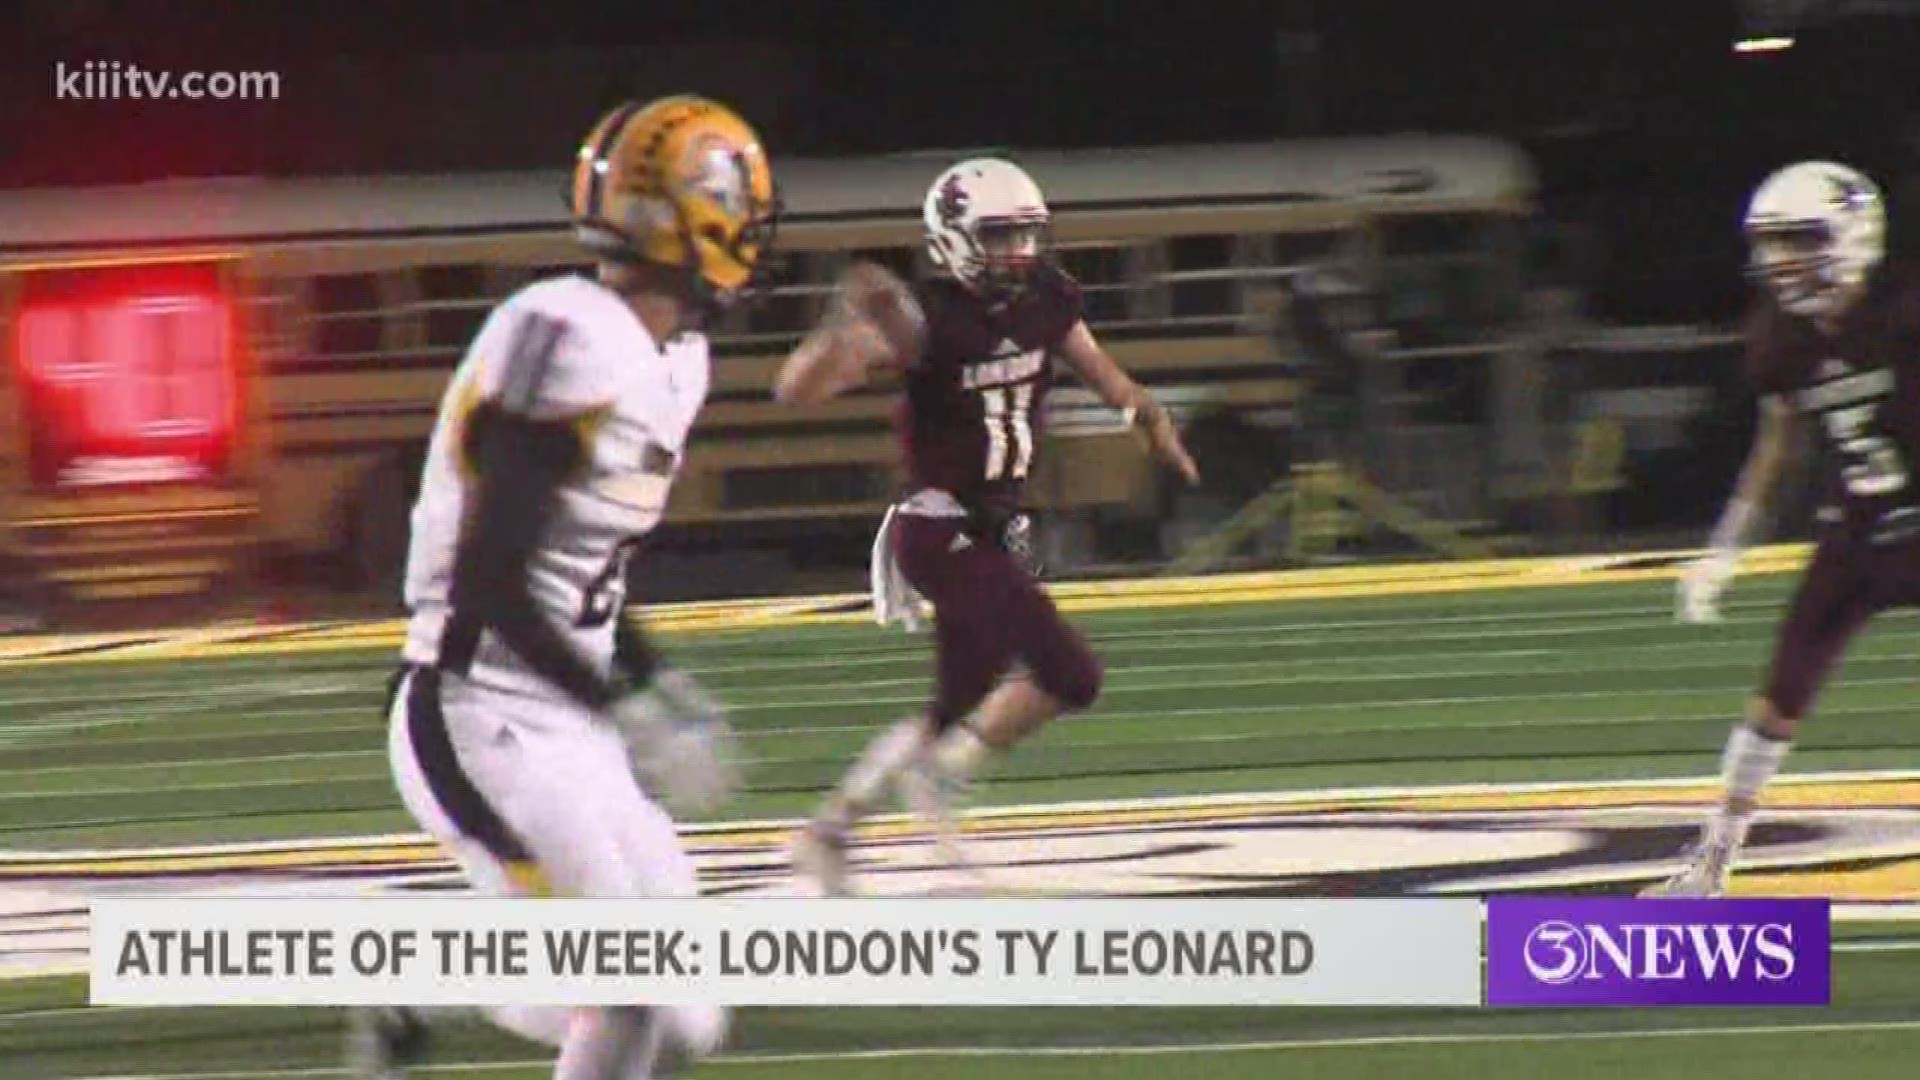 London's Ty Leonard is our 3 news athlete of the week!